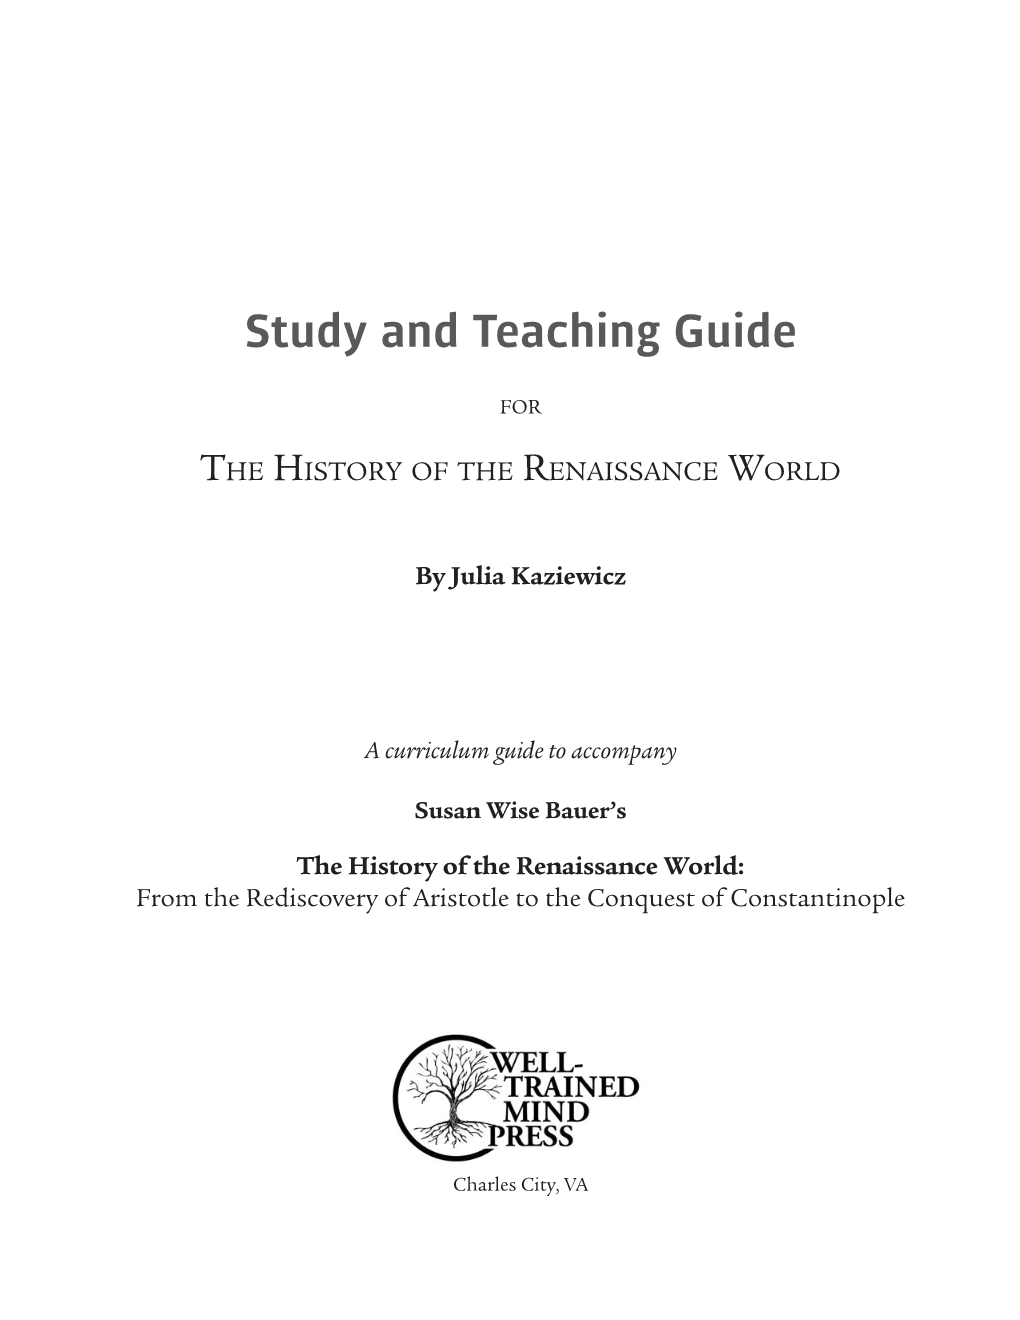 Study Guide History of the Renaissance World.Indd